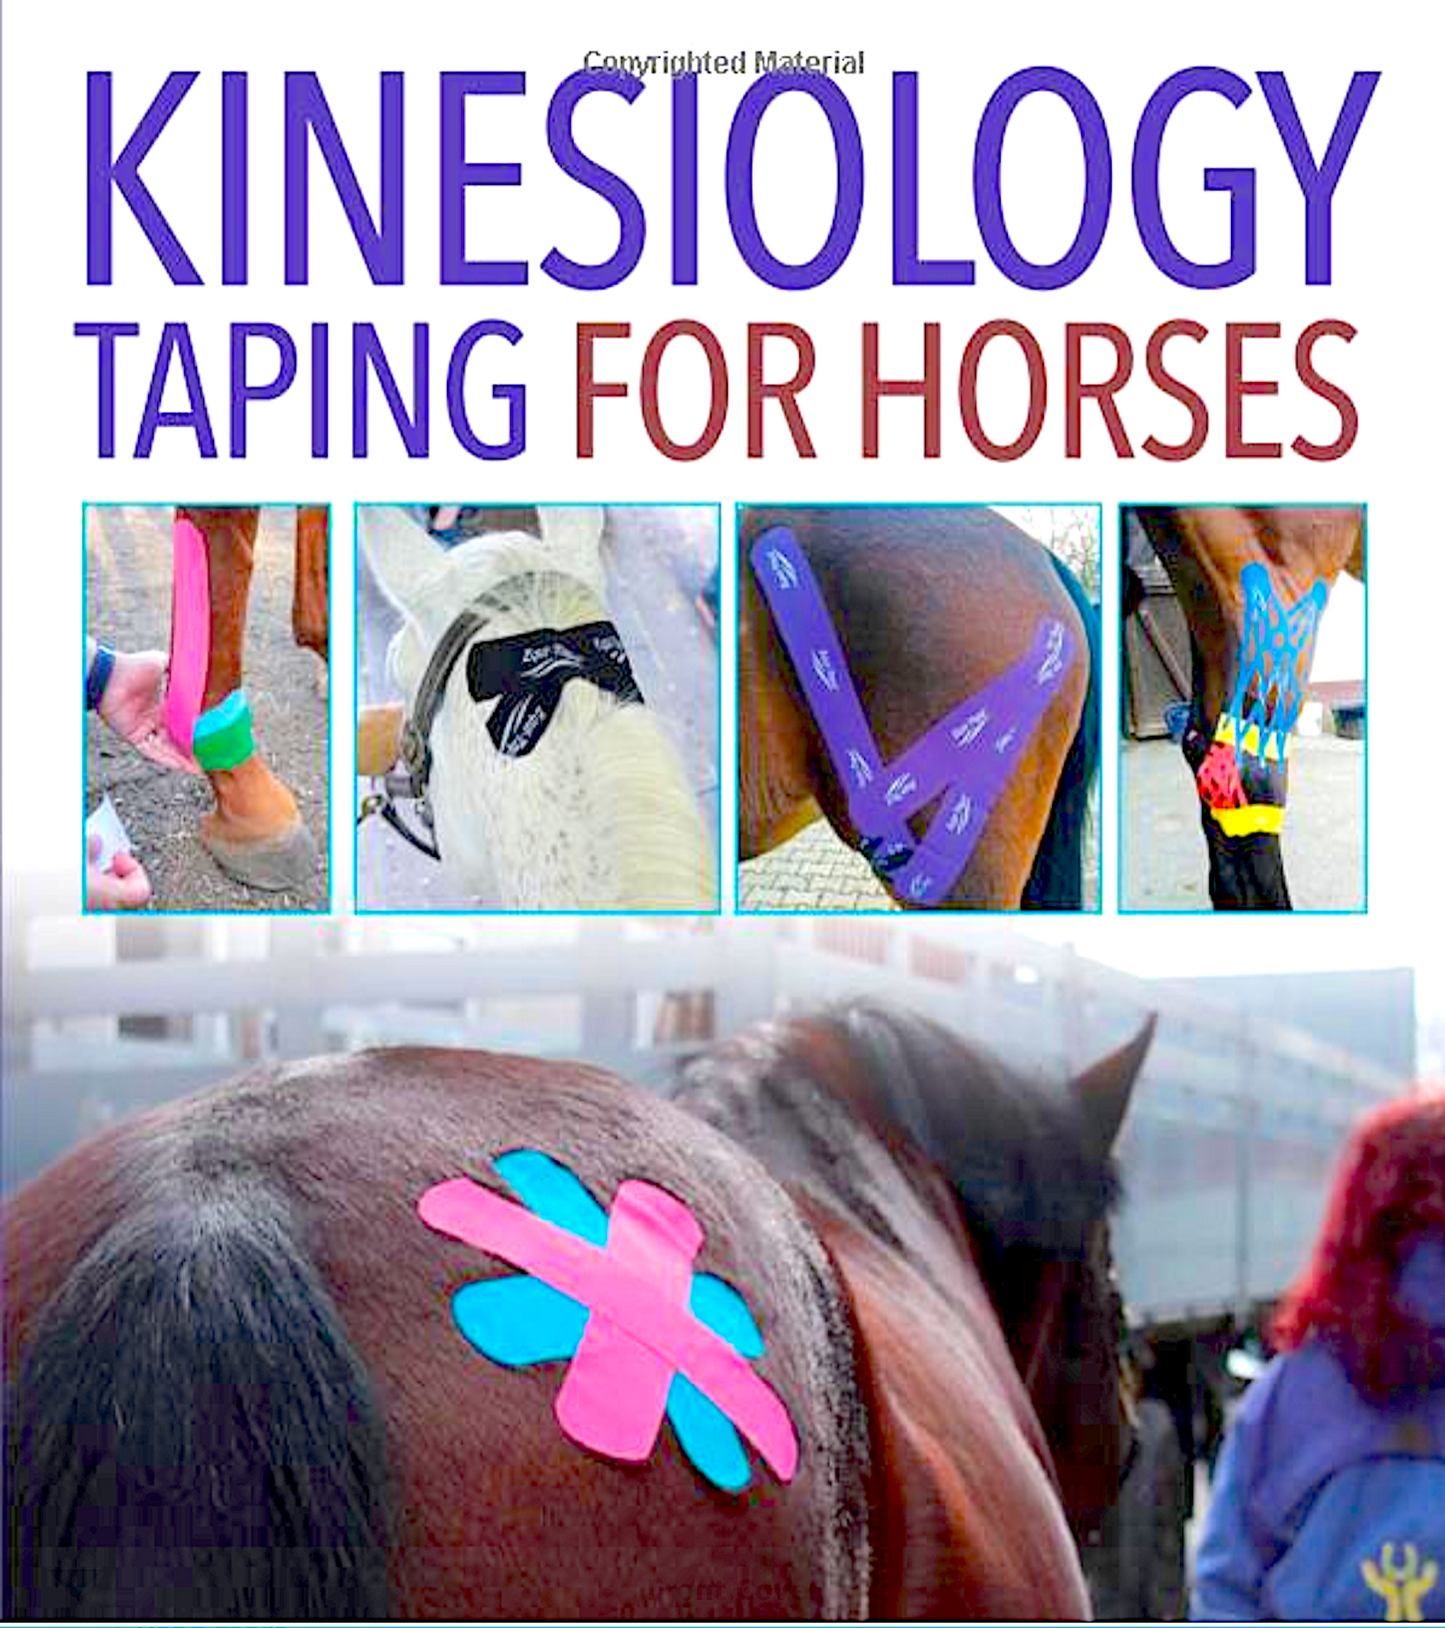 KINESIOLOGY TAPING FOR HORSES: complete guide for equine health, fitness, and performance-2018